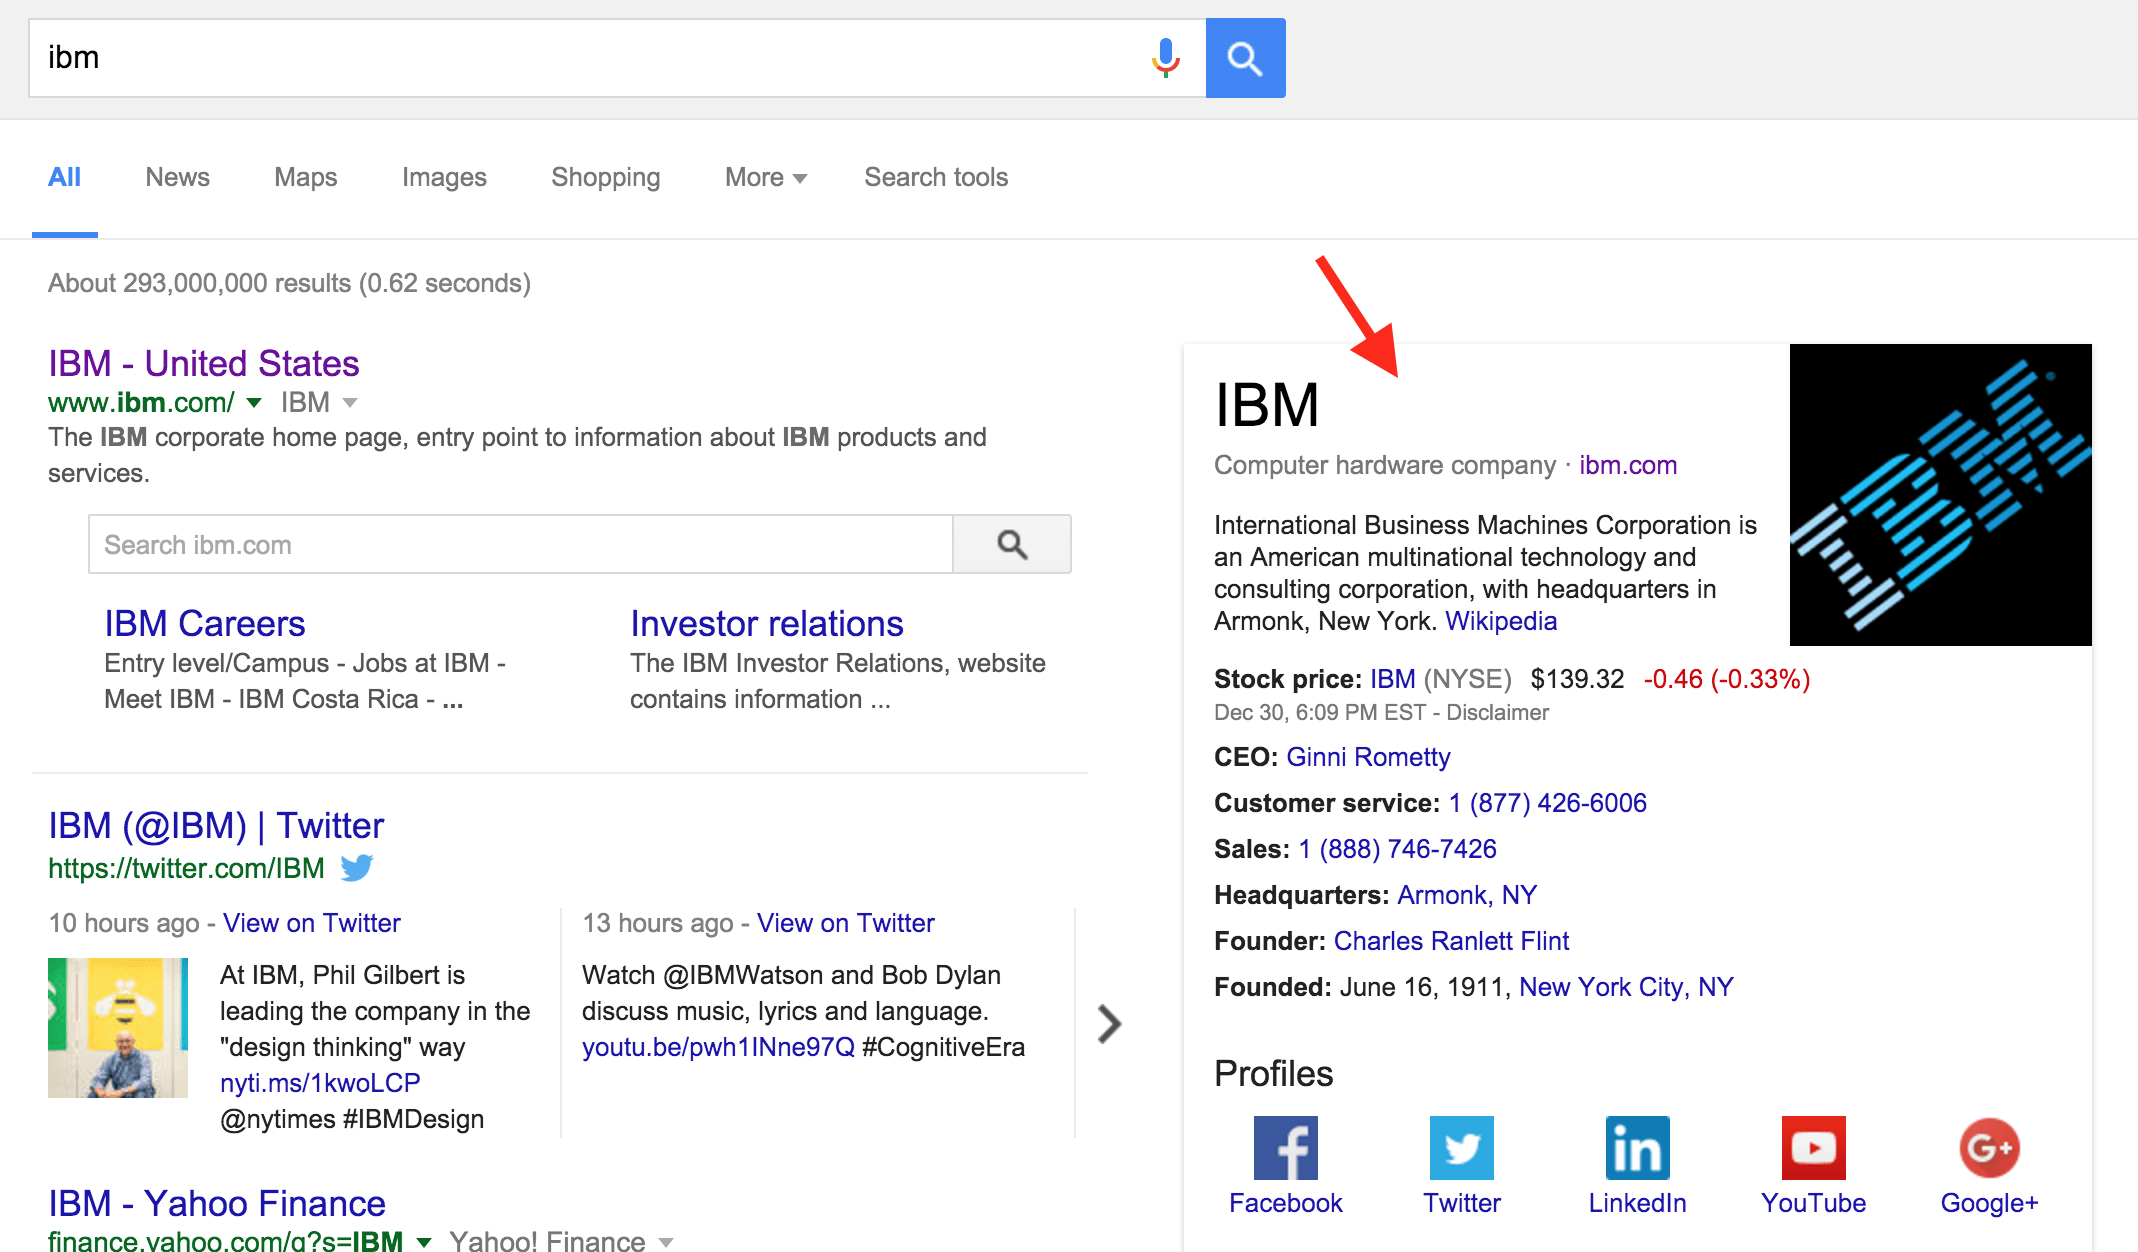 Google knowledge graph example